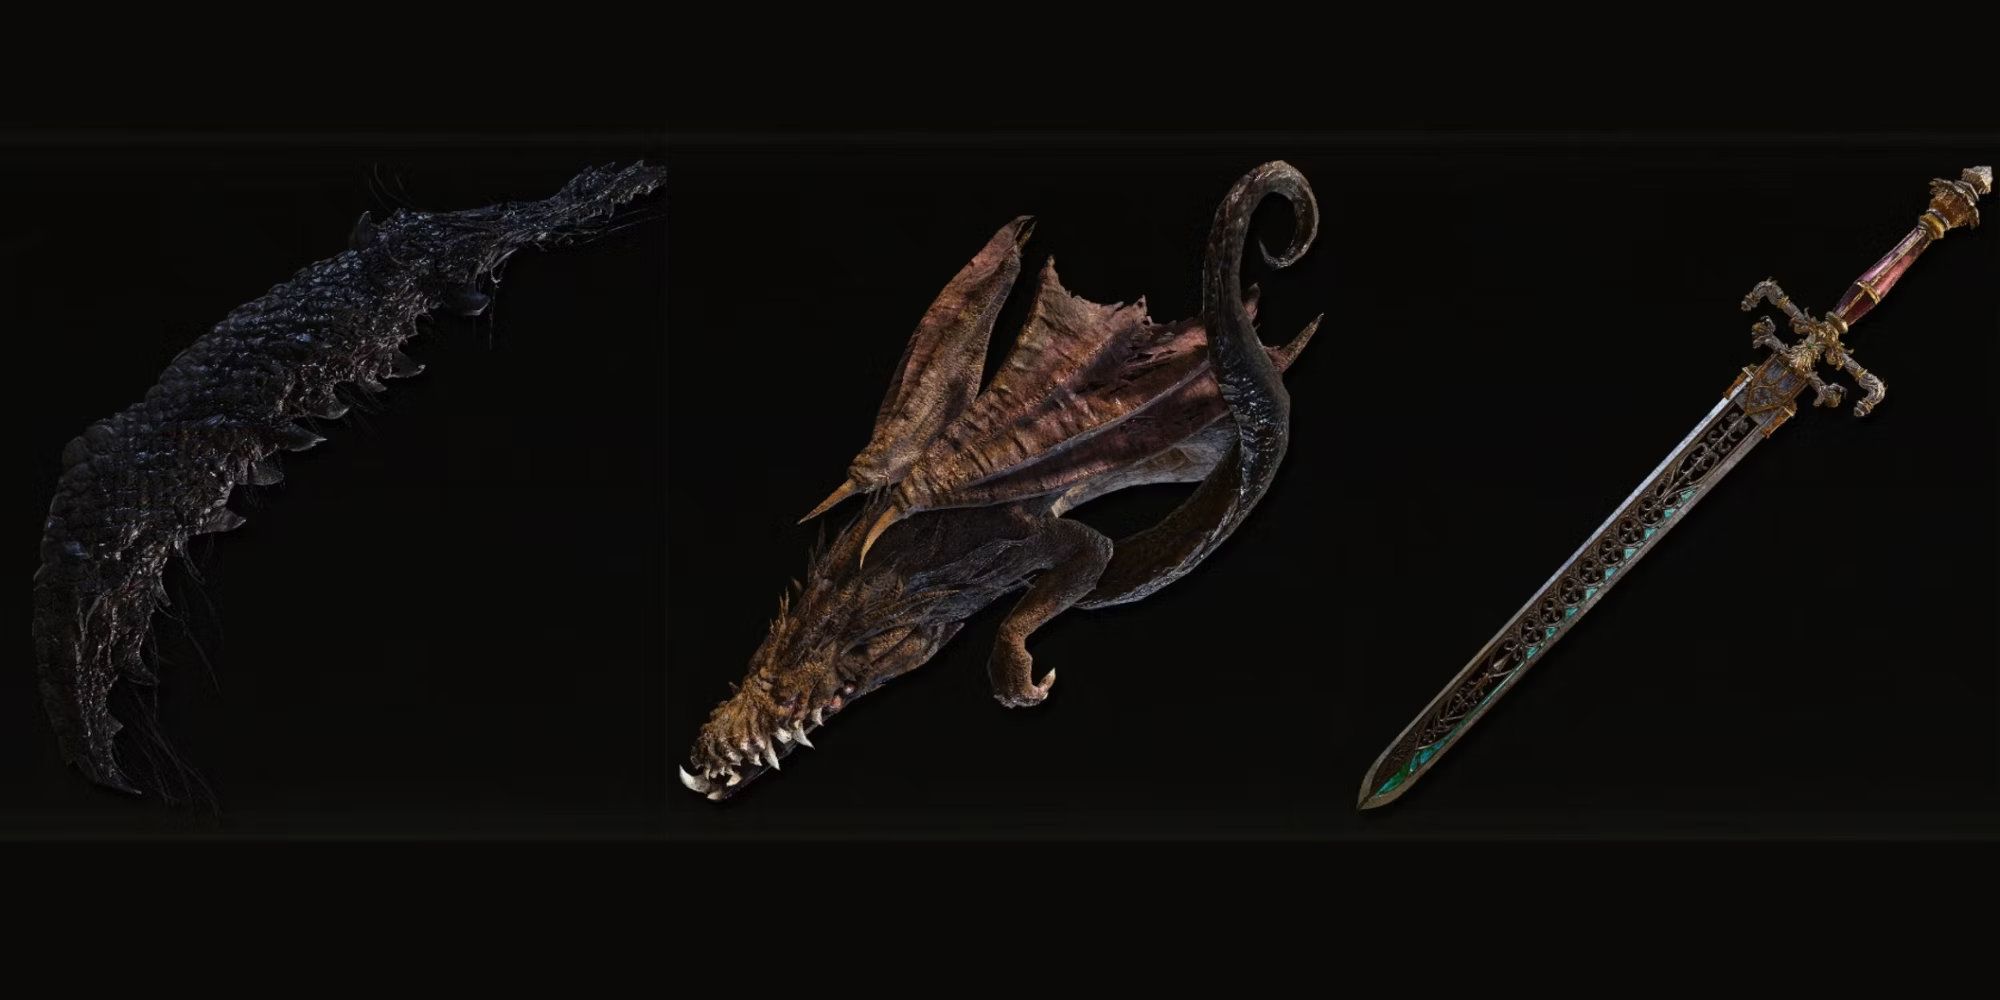 A leathery blade, a small dragon, and an ornate sword on a dark background